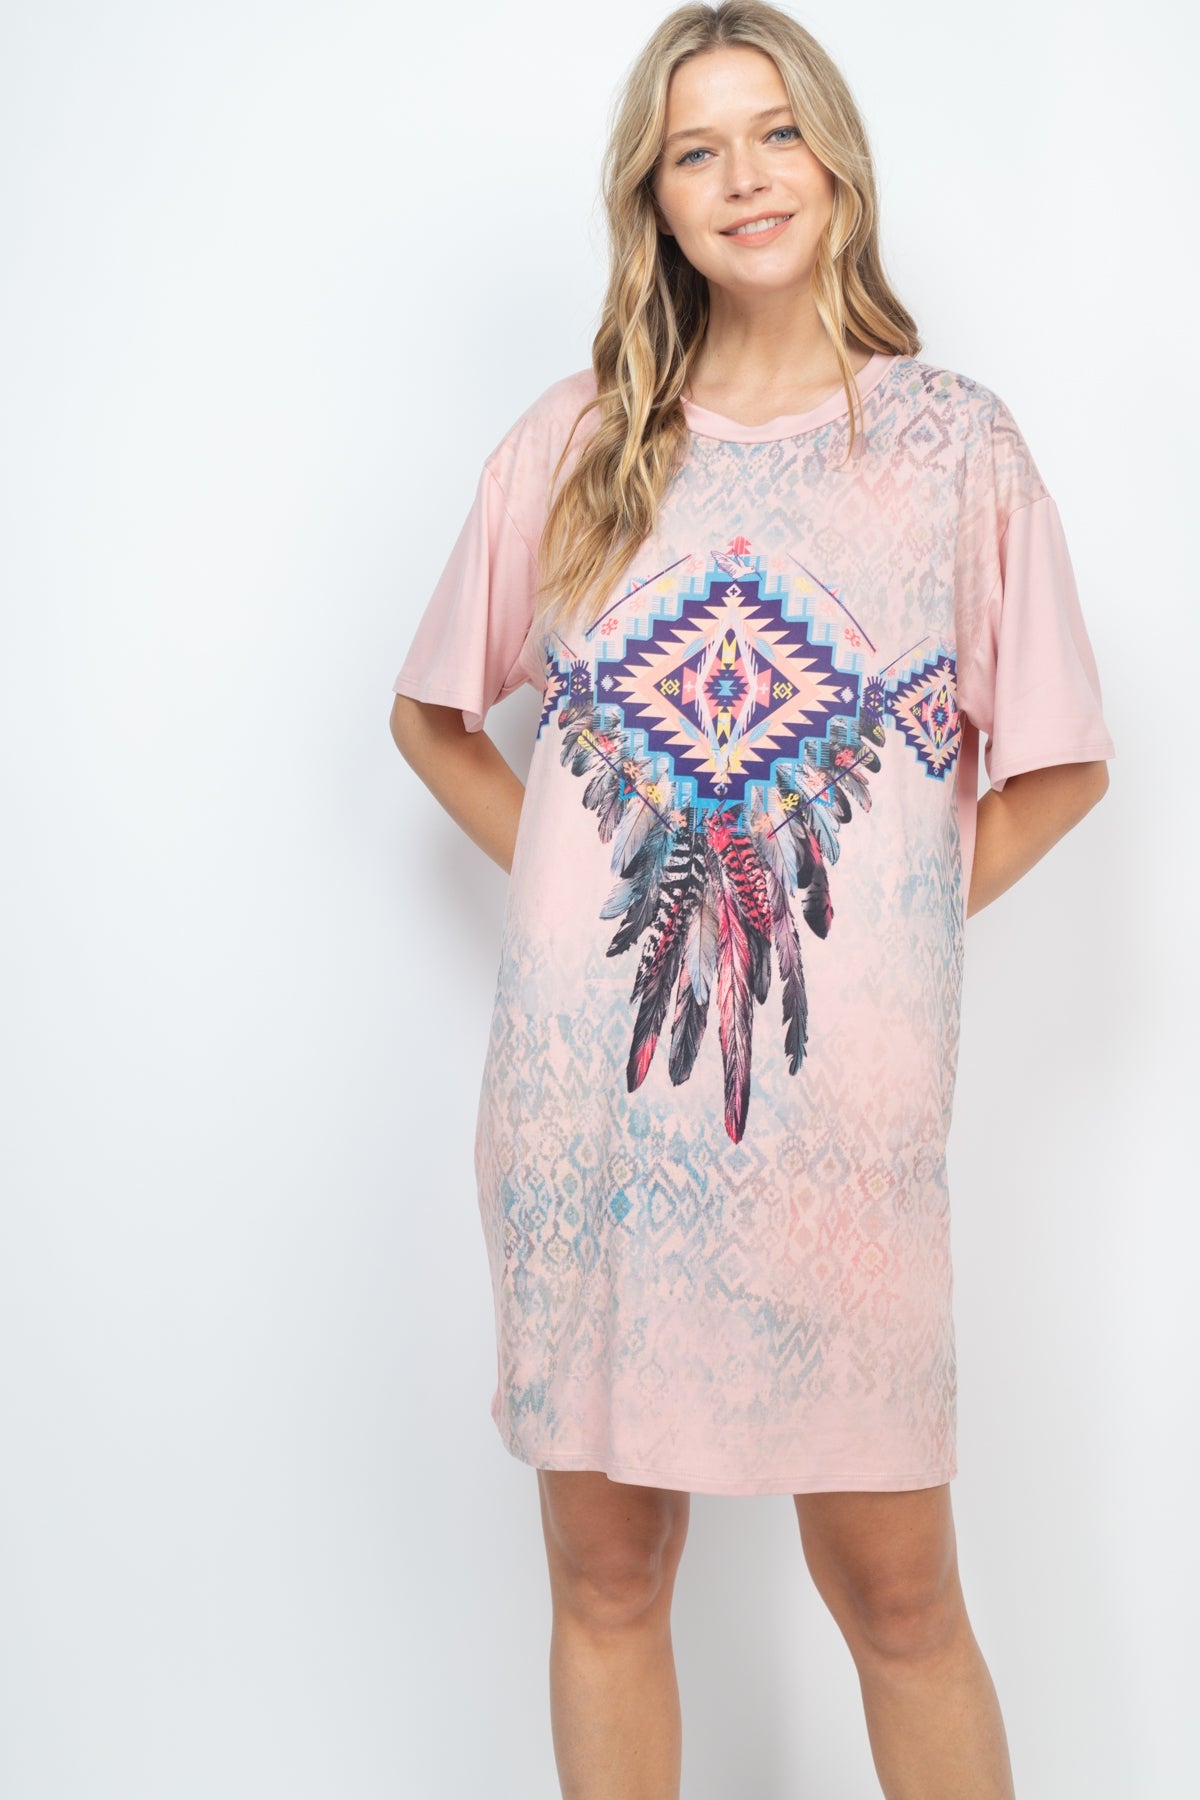 PINK FEATHER PRINT DRESS (NOW $3.50 ONLY!)